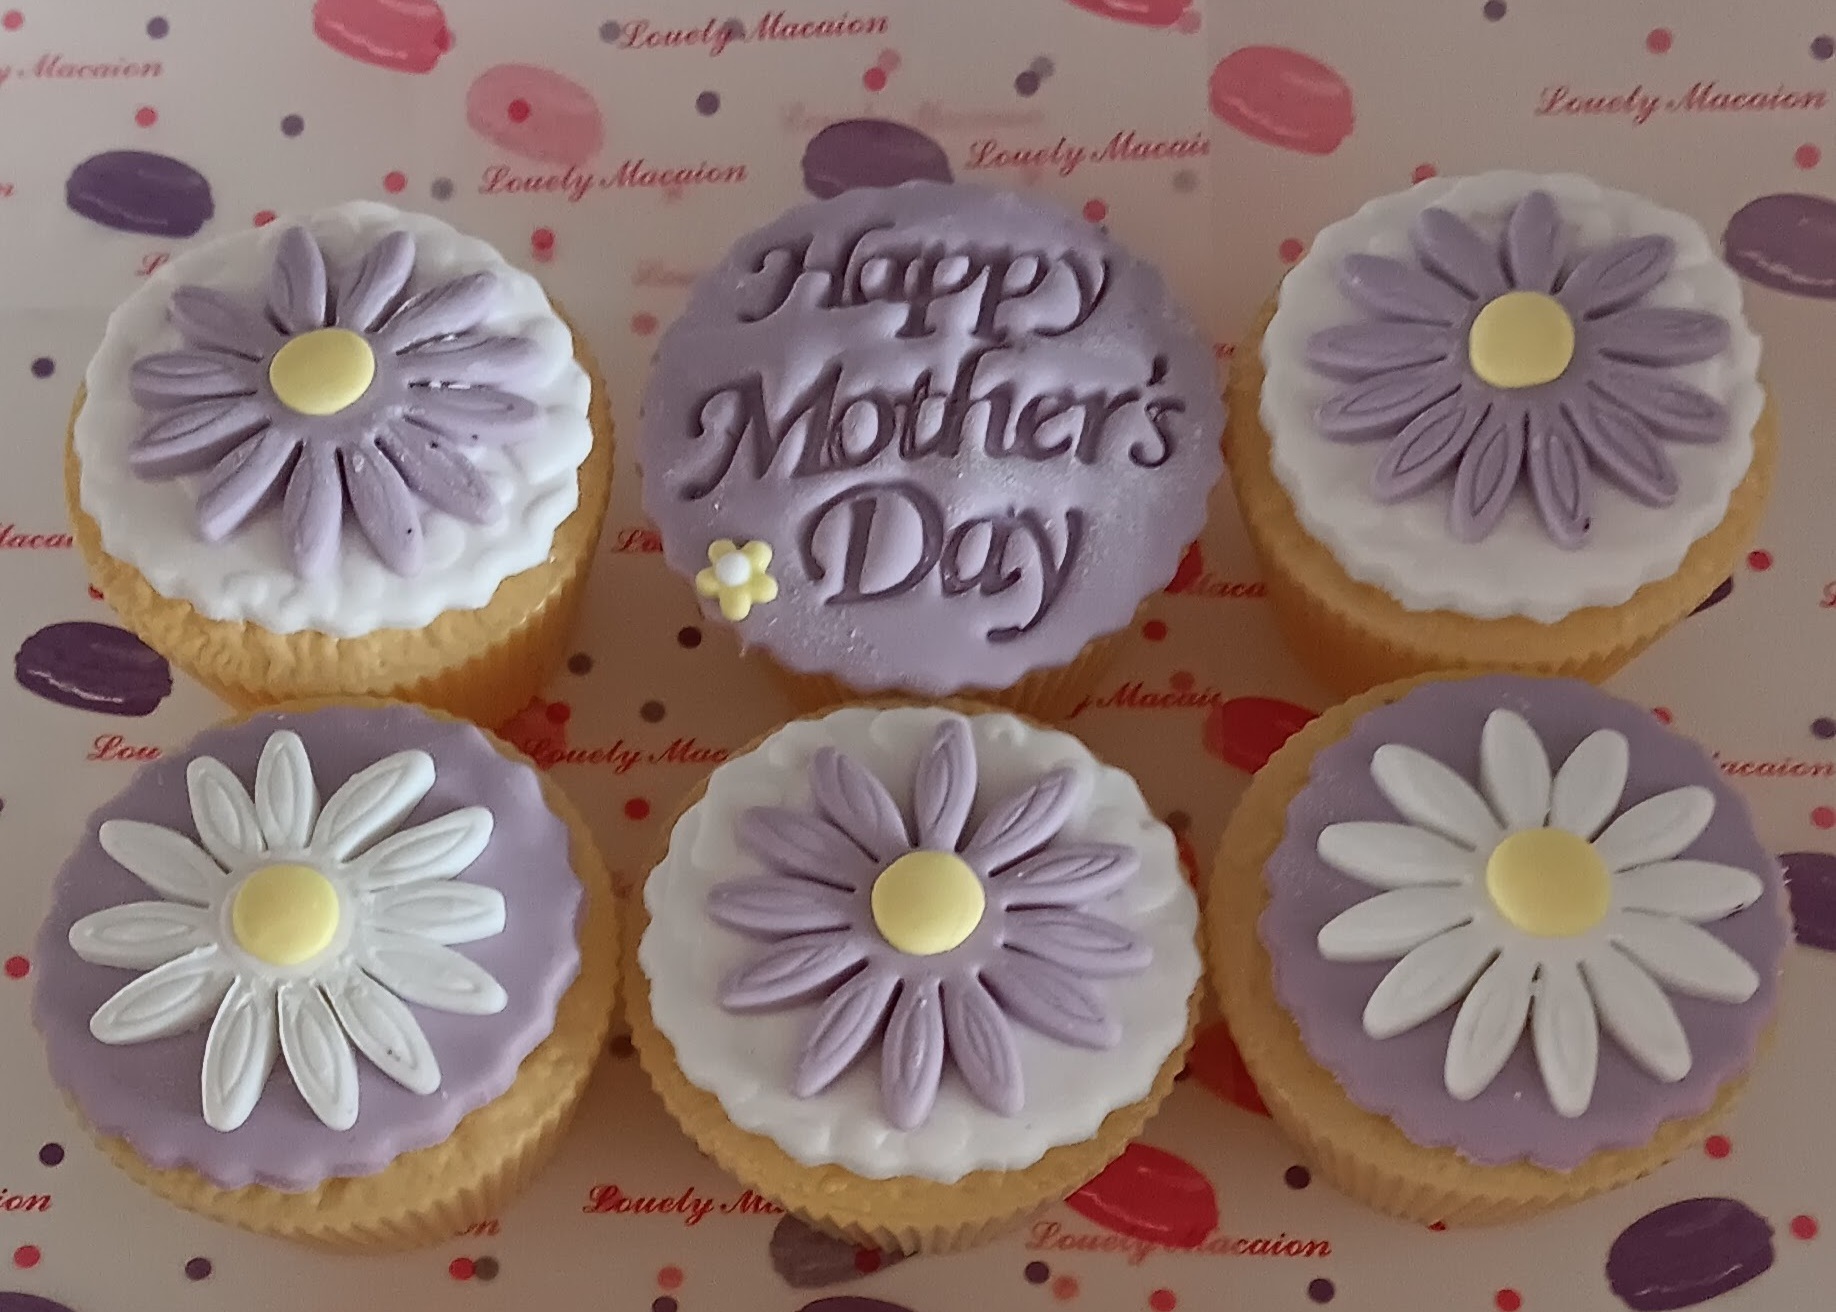 Mauve and white daisy mothers day cupcakes